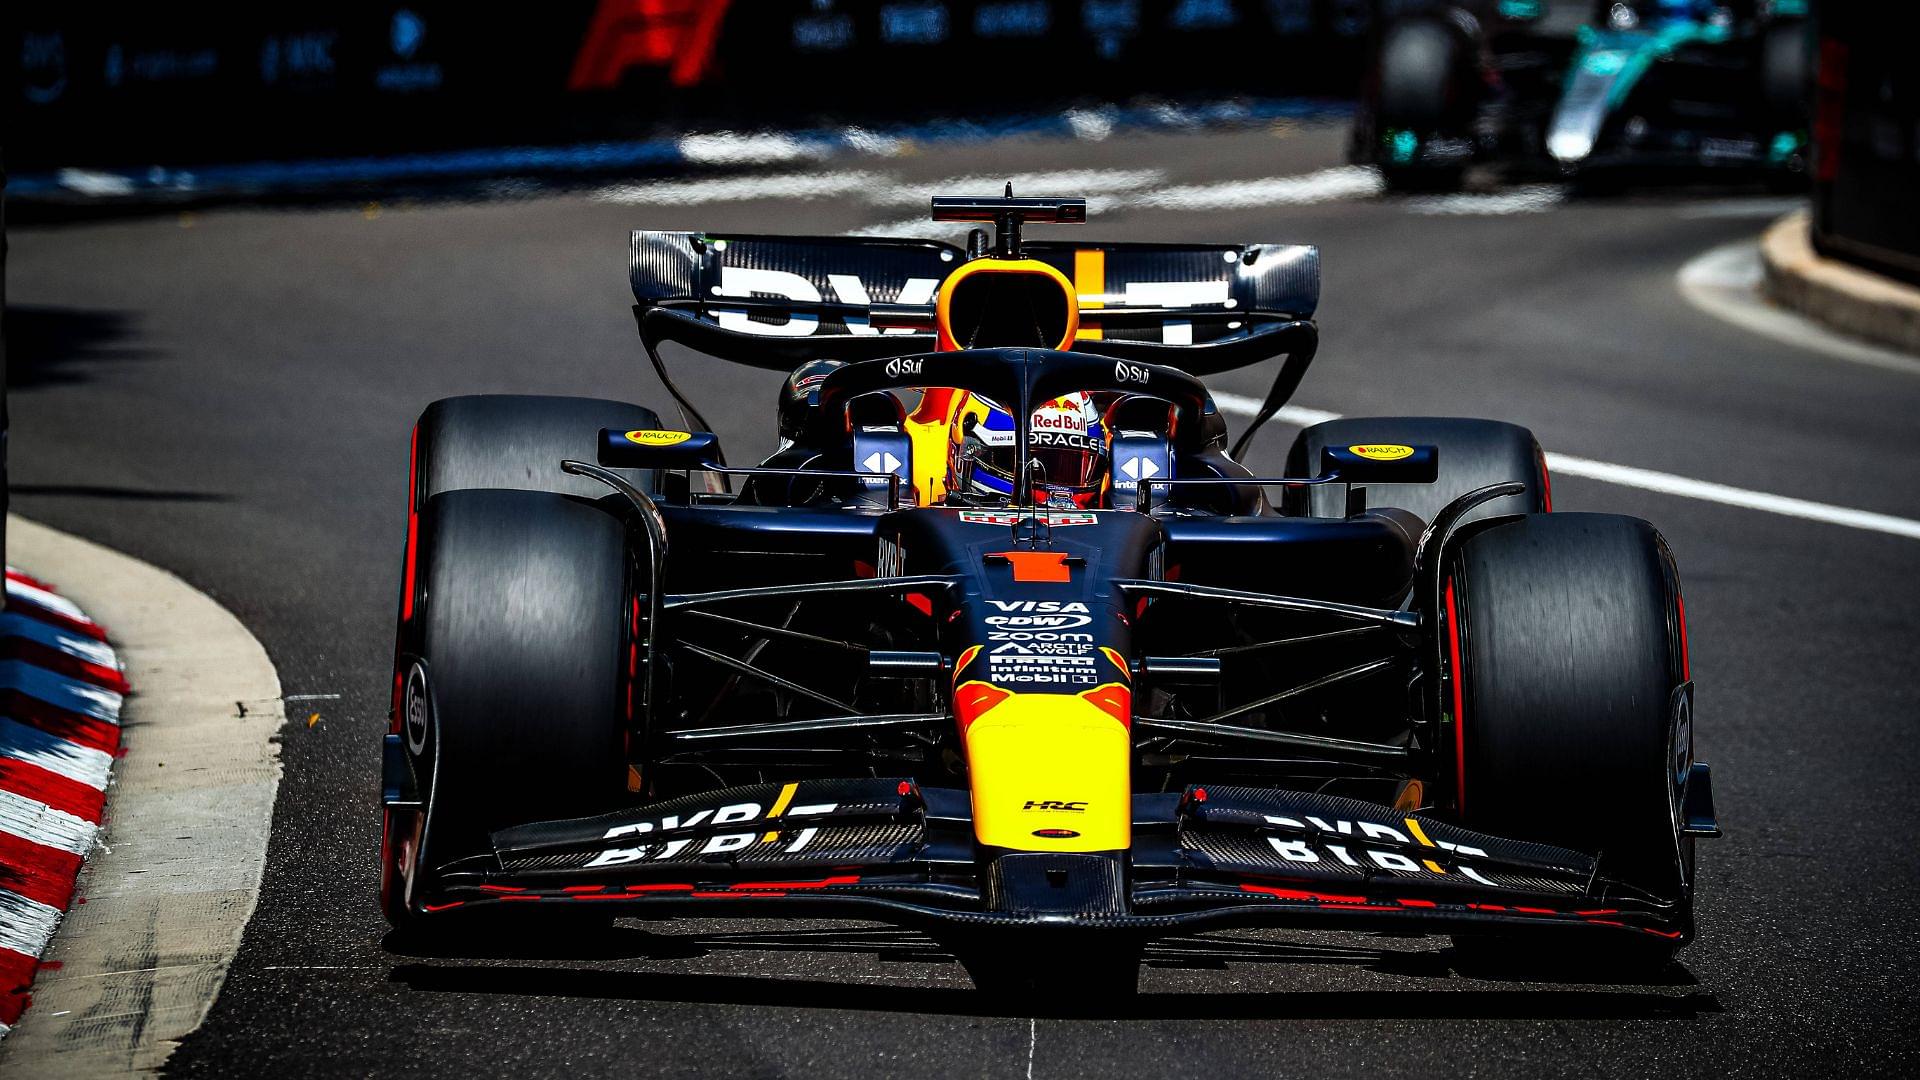 Red Bull Crosses It’s Fingers and Hopes Spanish GP Upgrades “Can Play the Game”